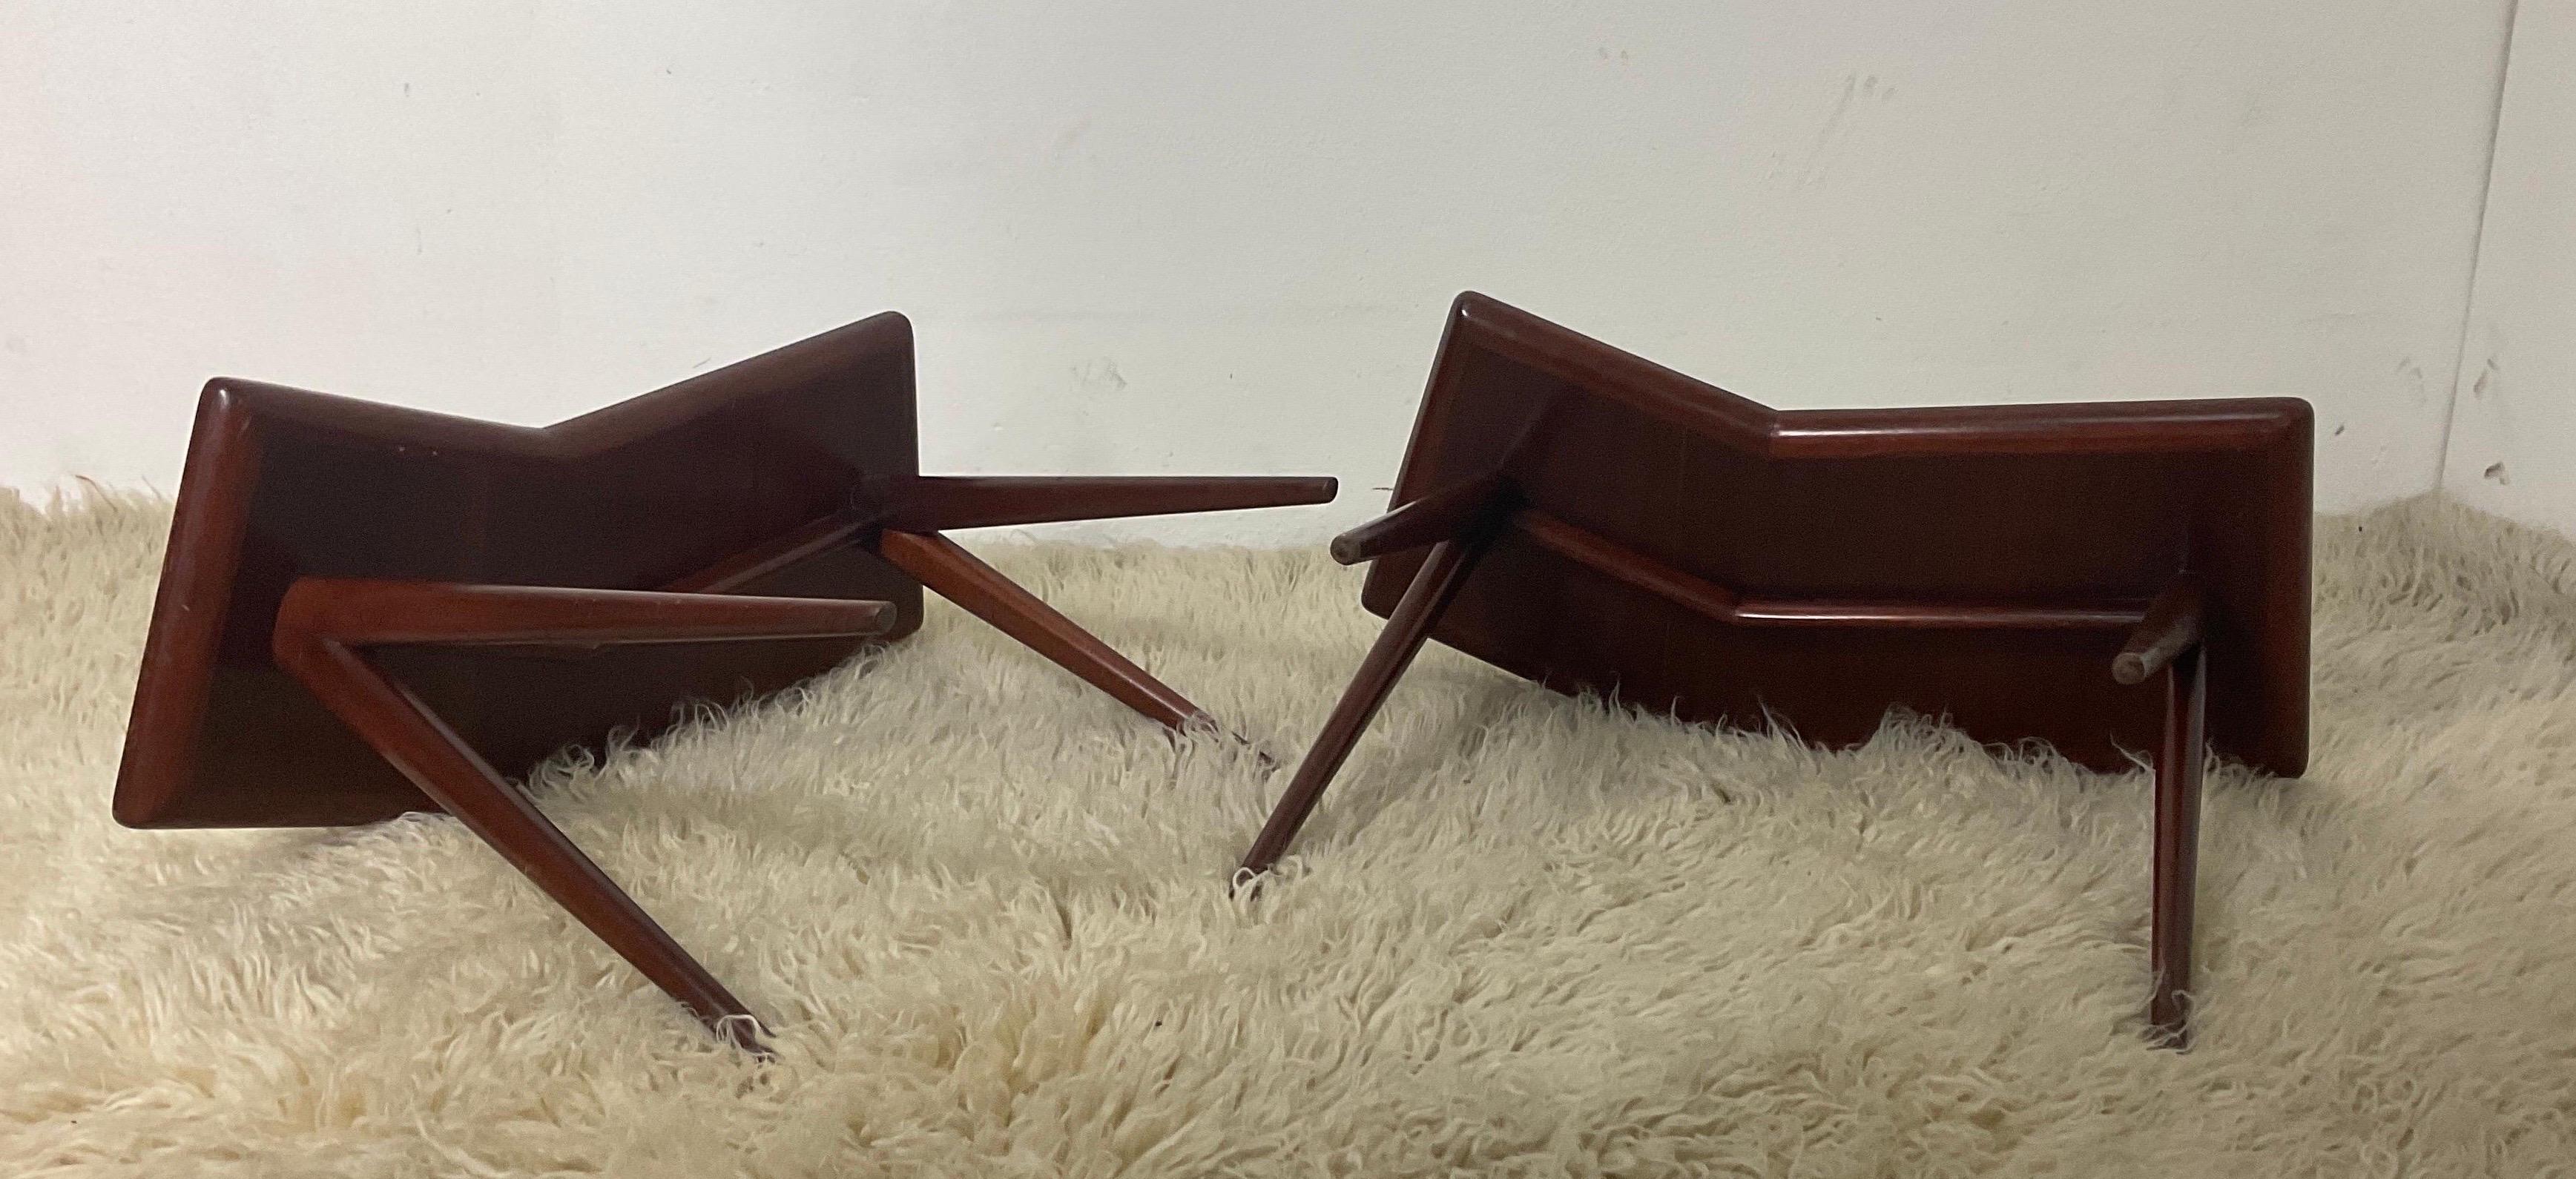 Pair of side tables by Gio Ponti for Fontana Arte, 1950s For Sale 2